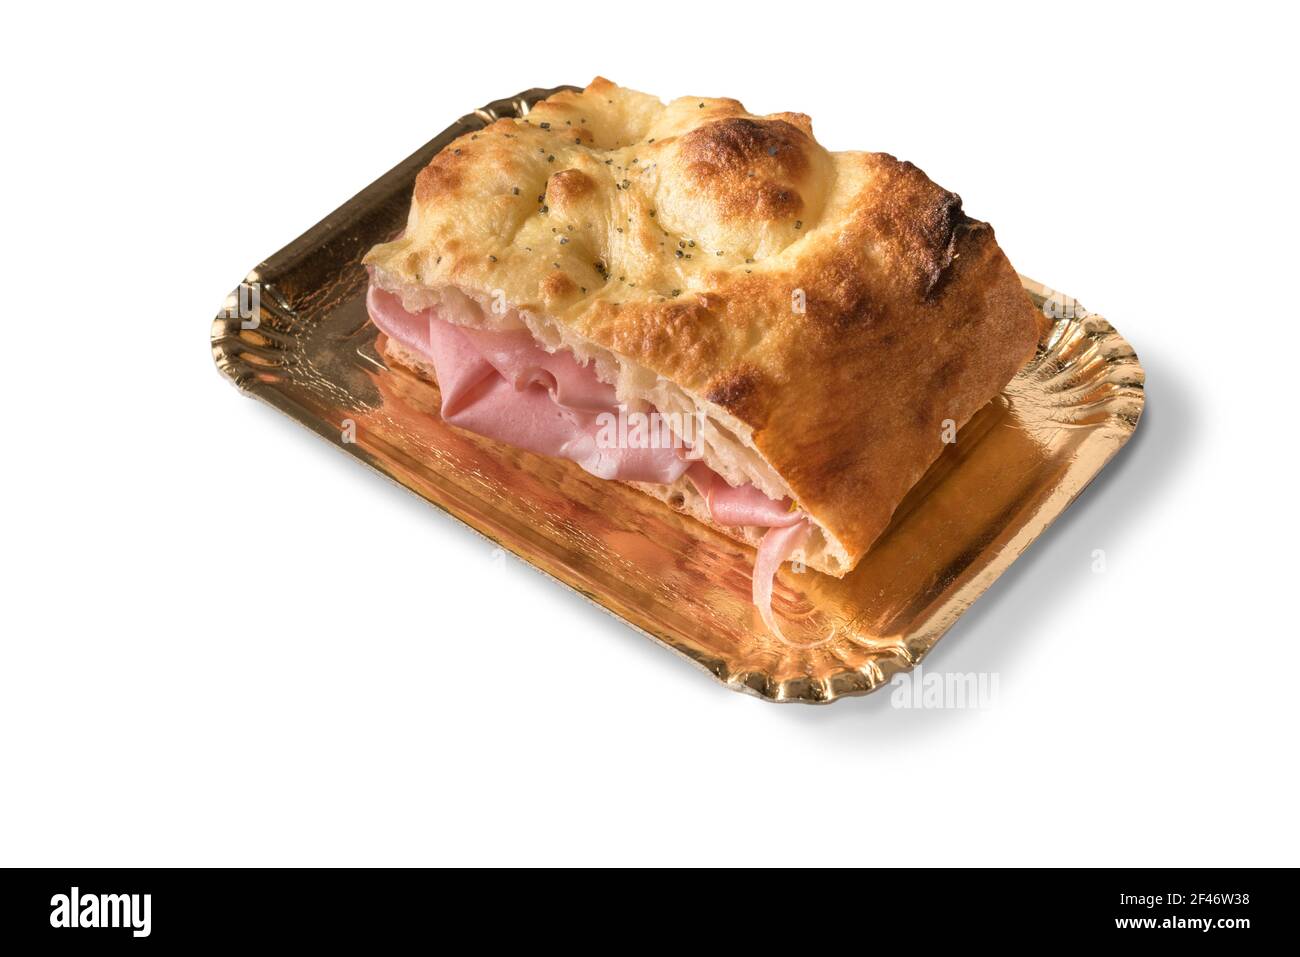 Focaccia bread sandwich filled with bologna mortadella in takeaway tray isolated on white Stock Photo